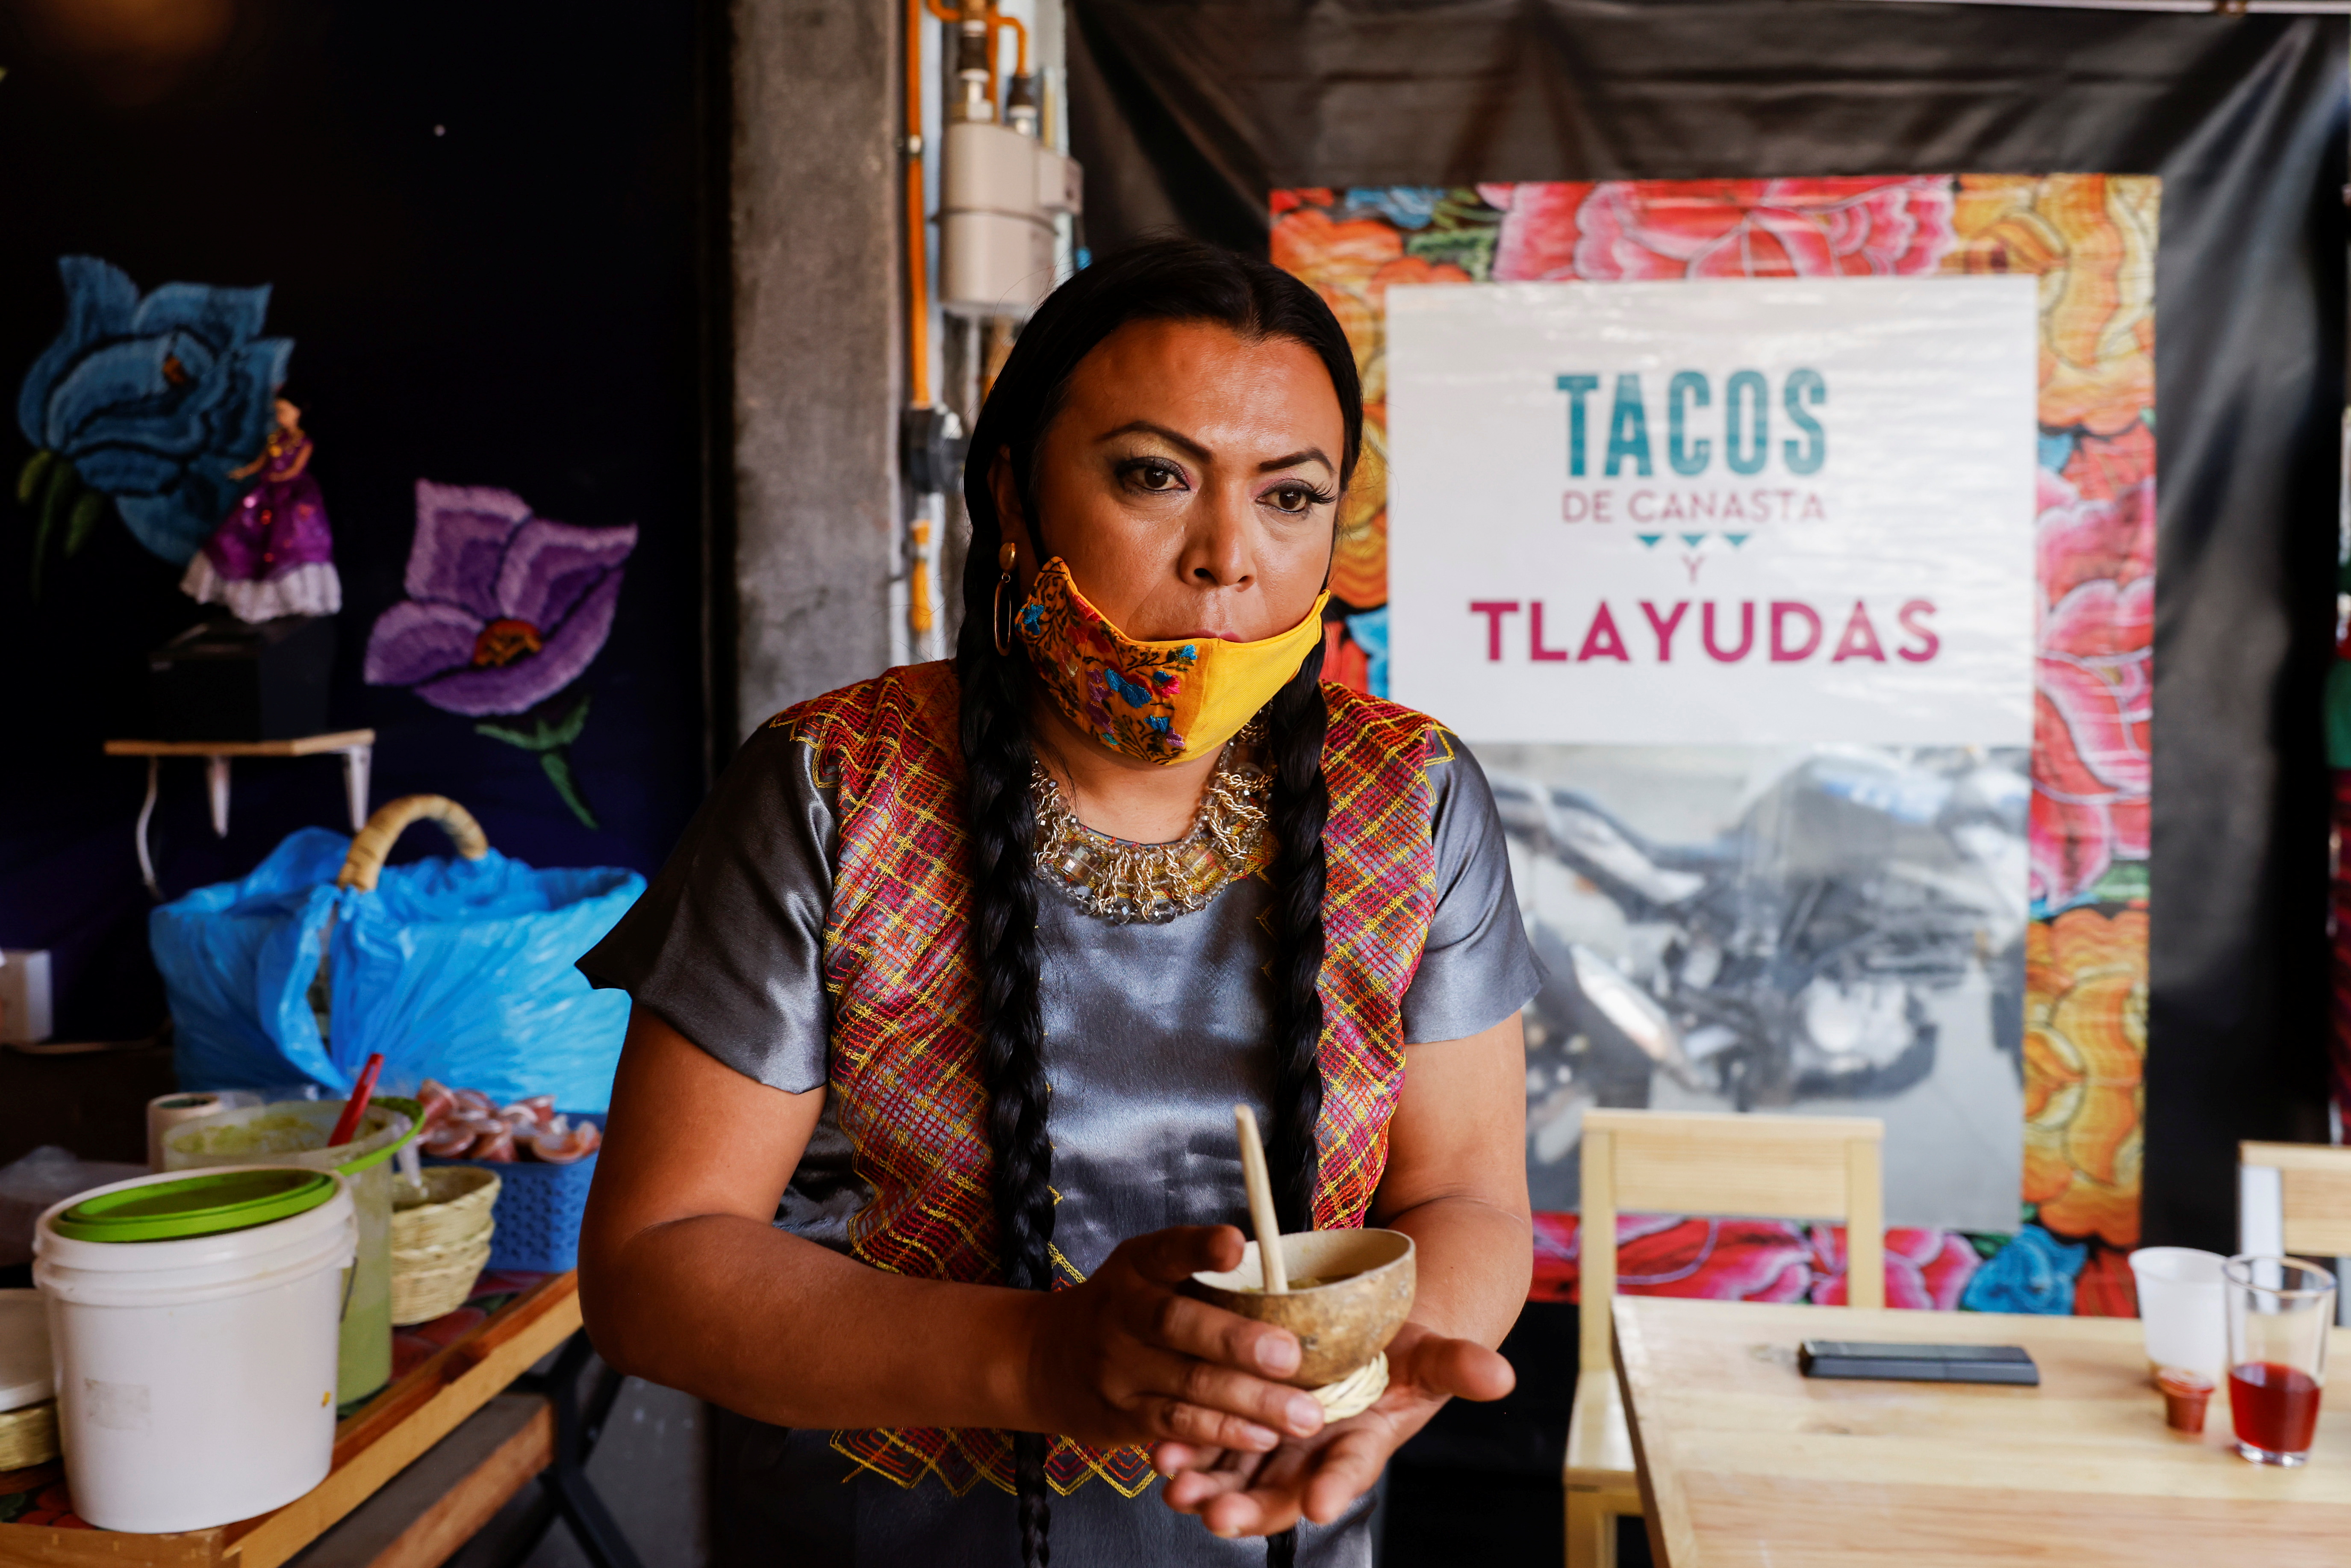 Lady Tacos de Canasta is set to campaign in local elections in Mexico City